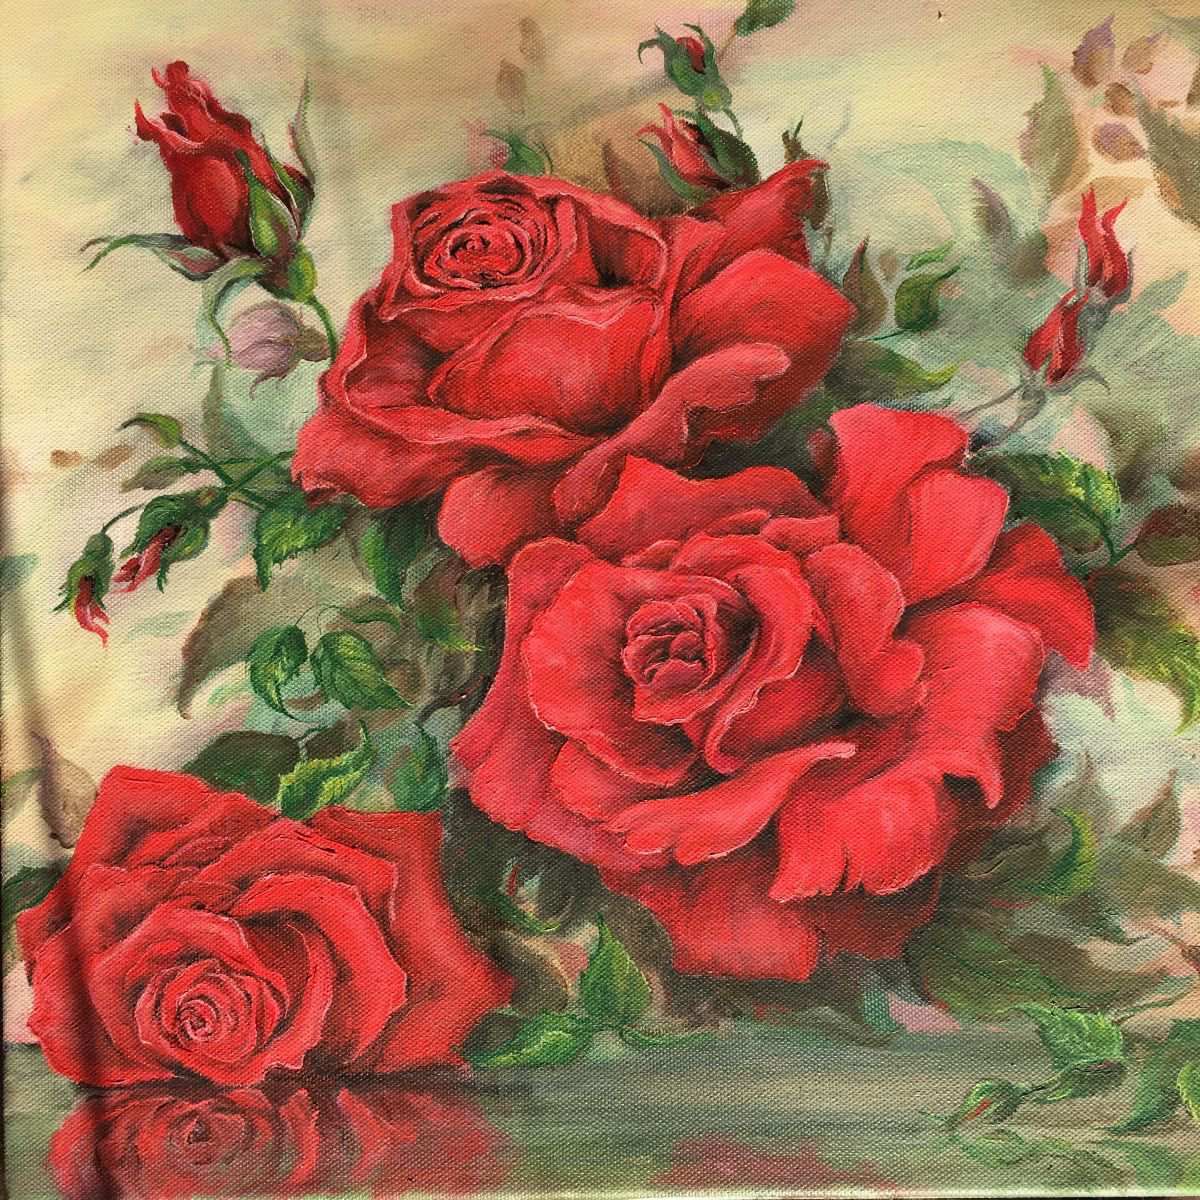 Mistery red roses by oana voda